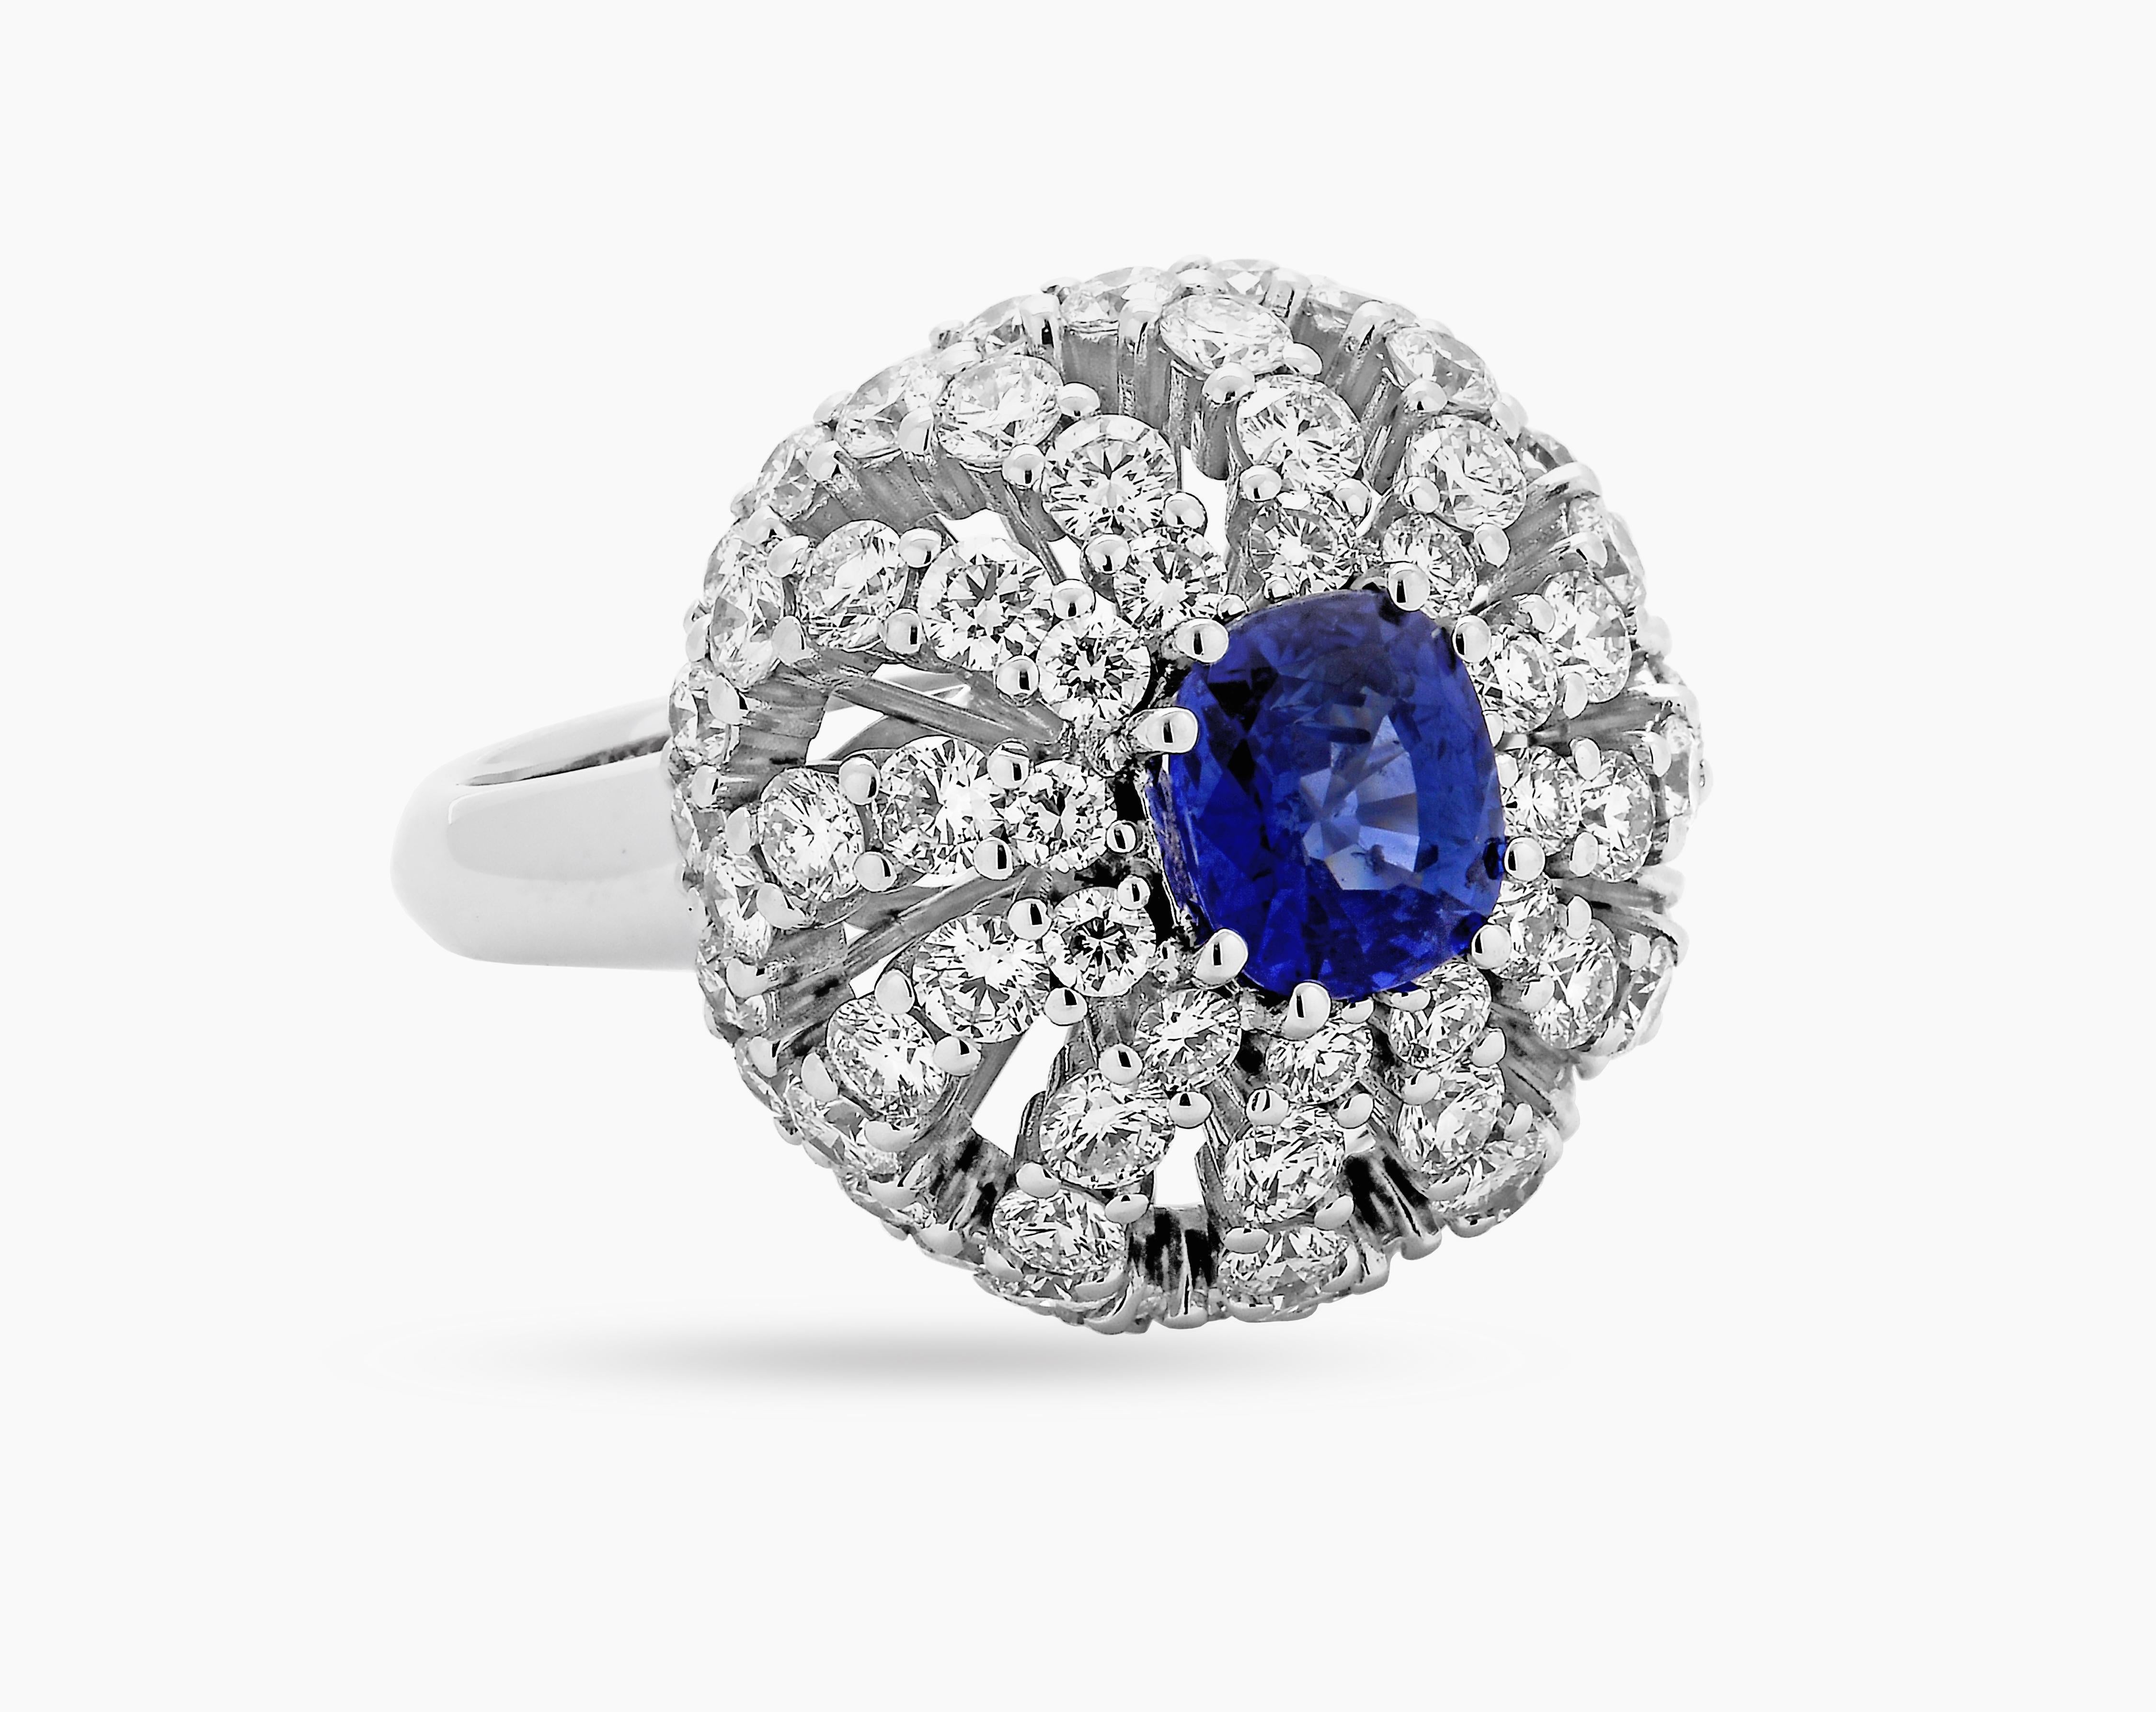 Contemporary 1.82 ct Natural Royal Blue Sapphire Ring with Diamonds 18k White Gold For Sale